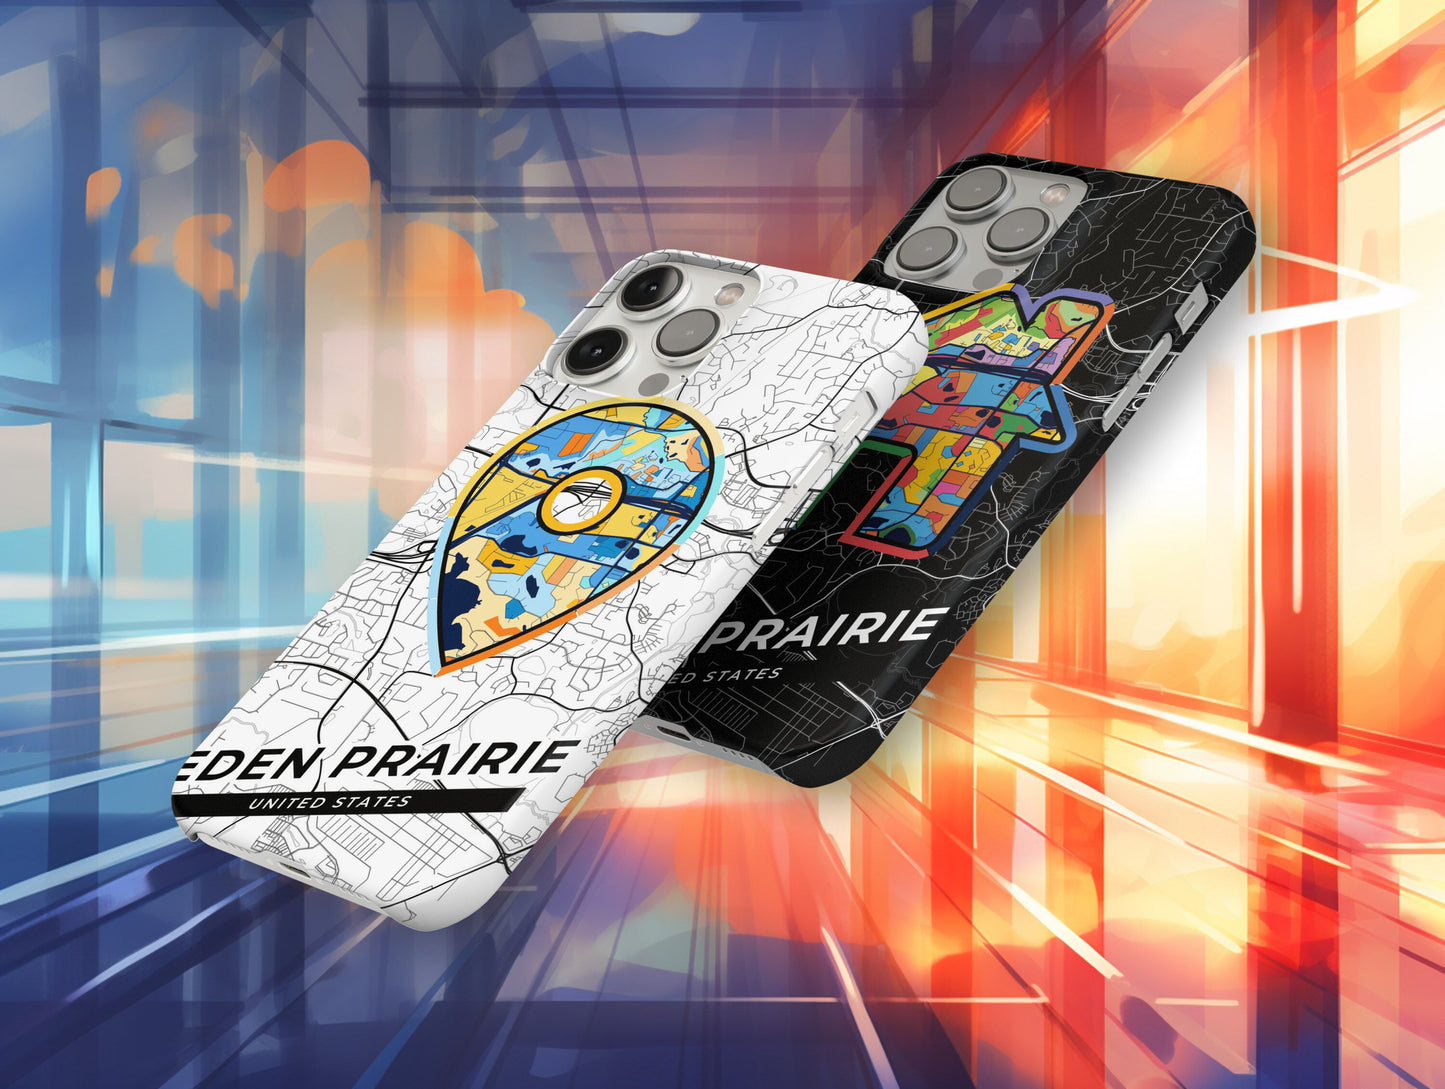 Eden Prairie Minnesota slim phone case with colorful icon. Birthday, wedding or housewarming gift. Couple match cases.